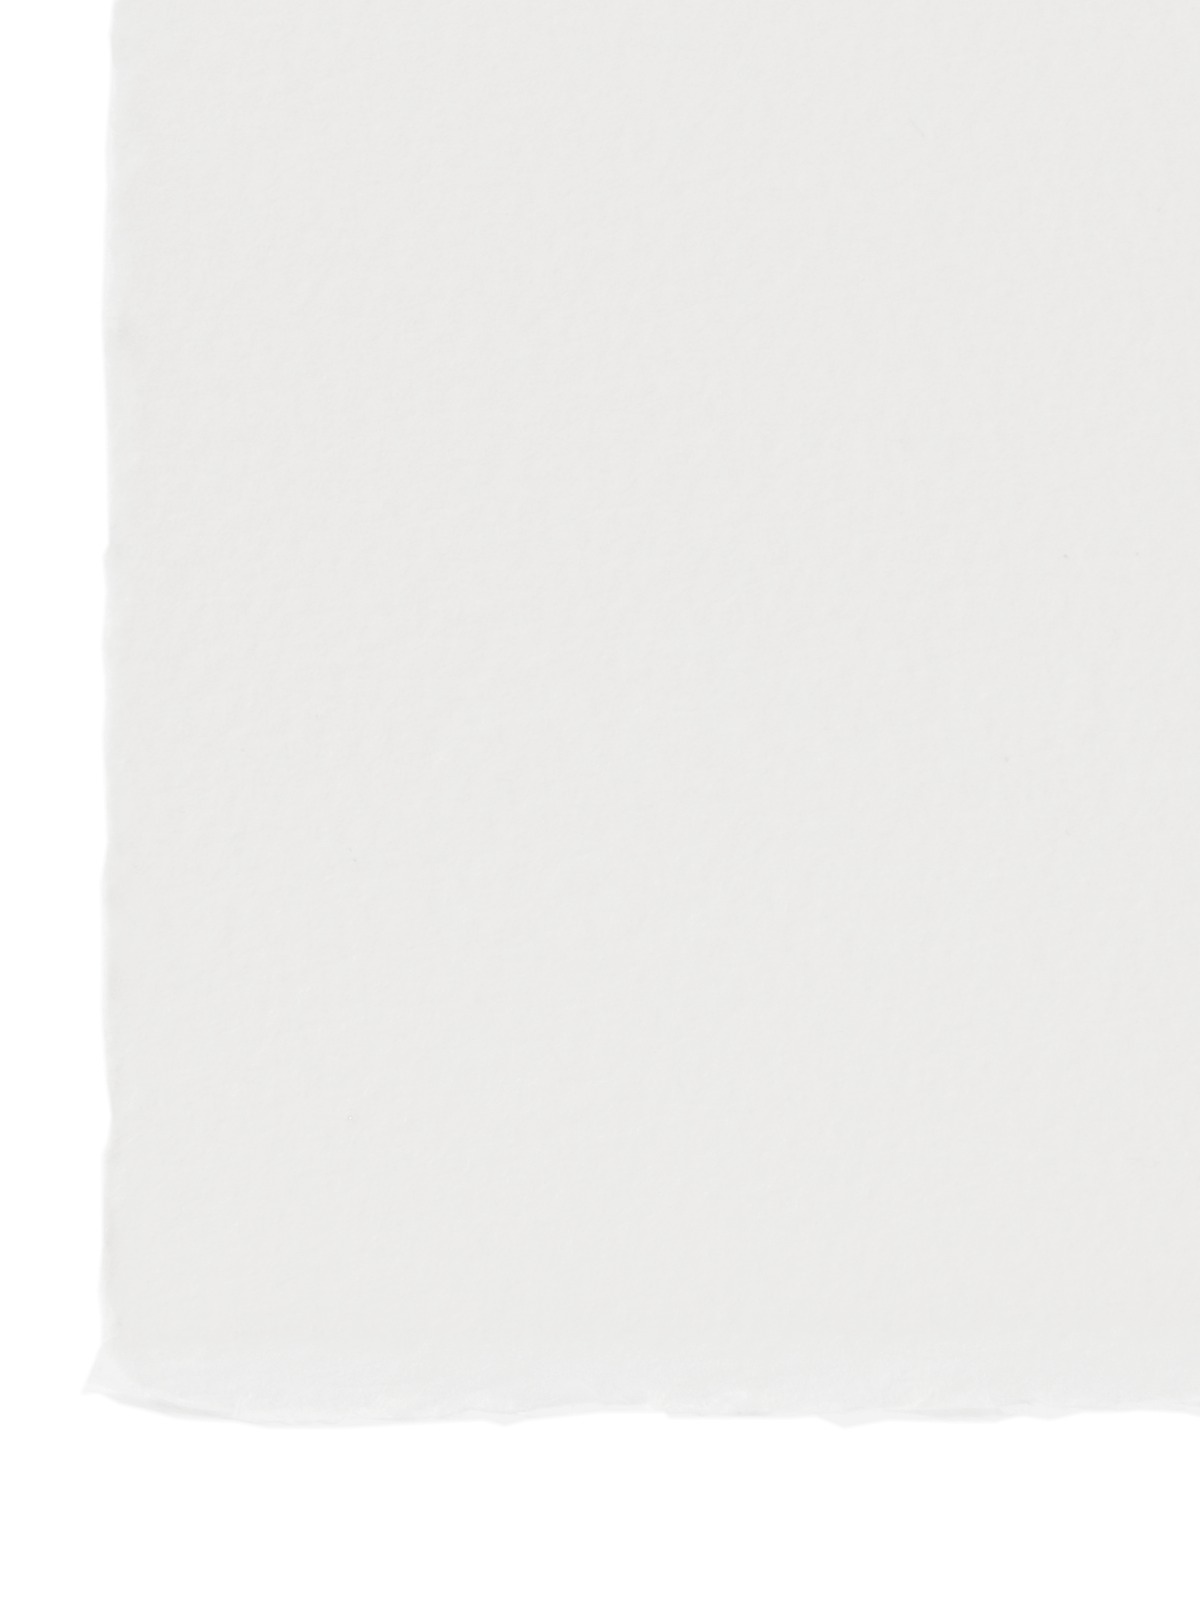 Cover Printmaking Paper White 22 In. X 30 In. Sheet